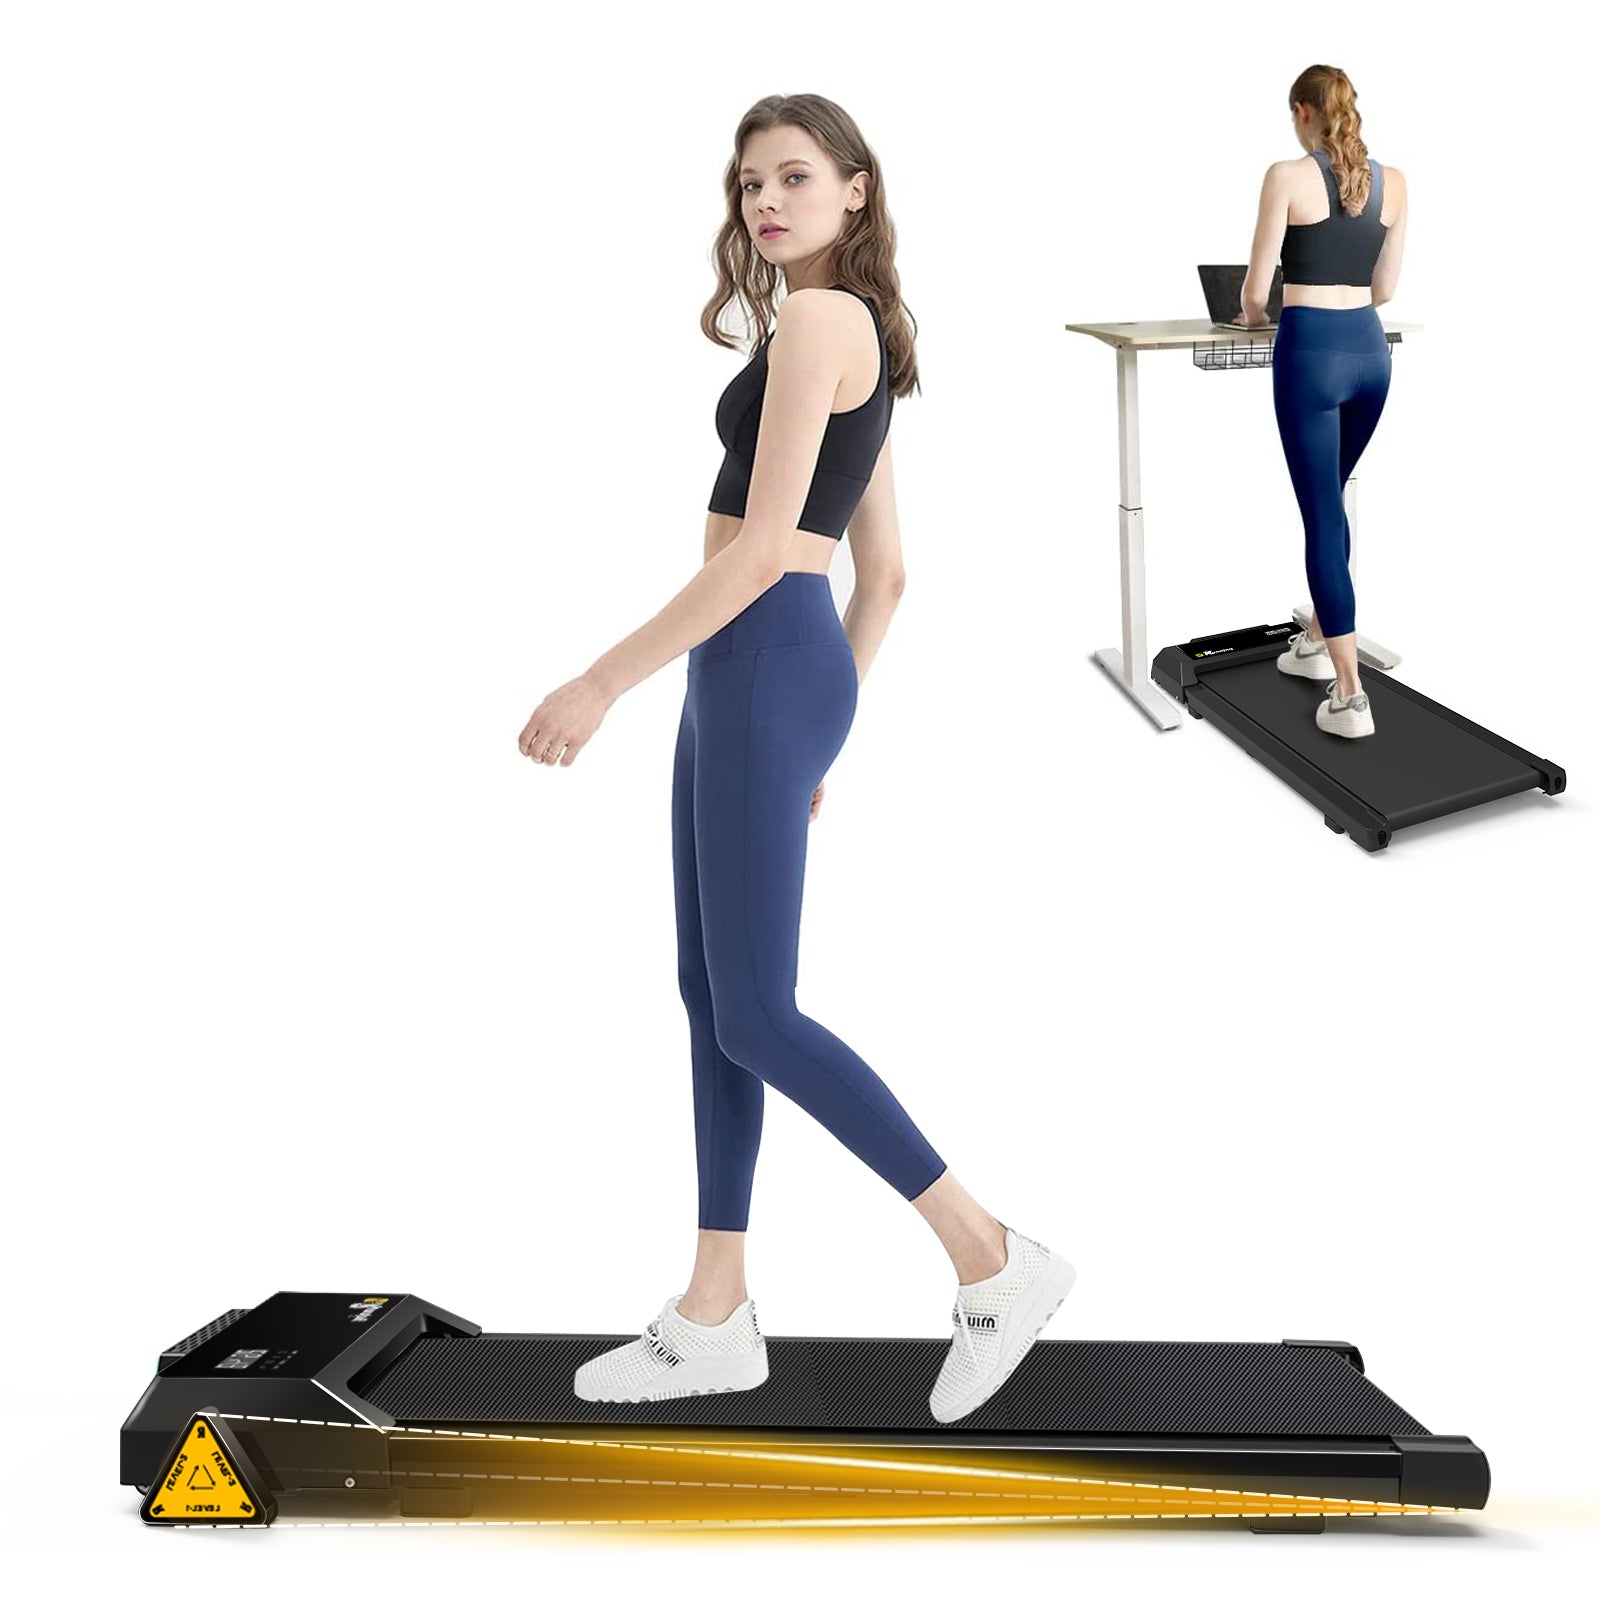 Elite-Comfort Home Treadmill: Compact, Powerful 2.5HP, Adjustable Speed & Incline